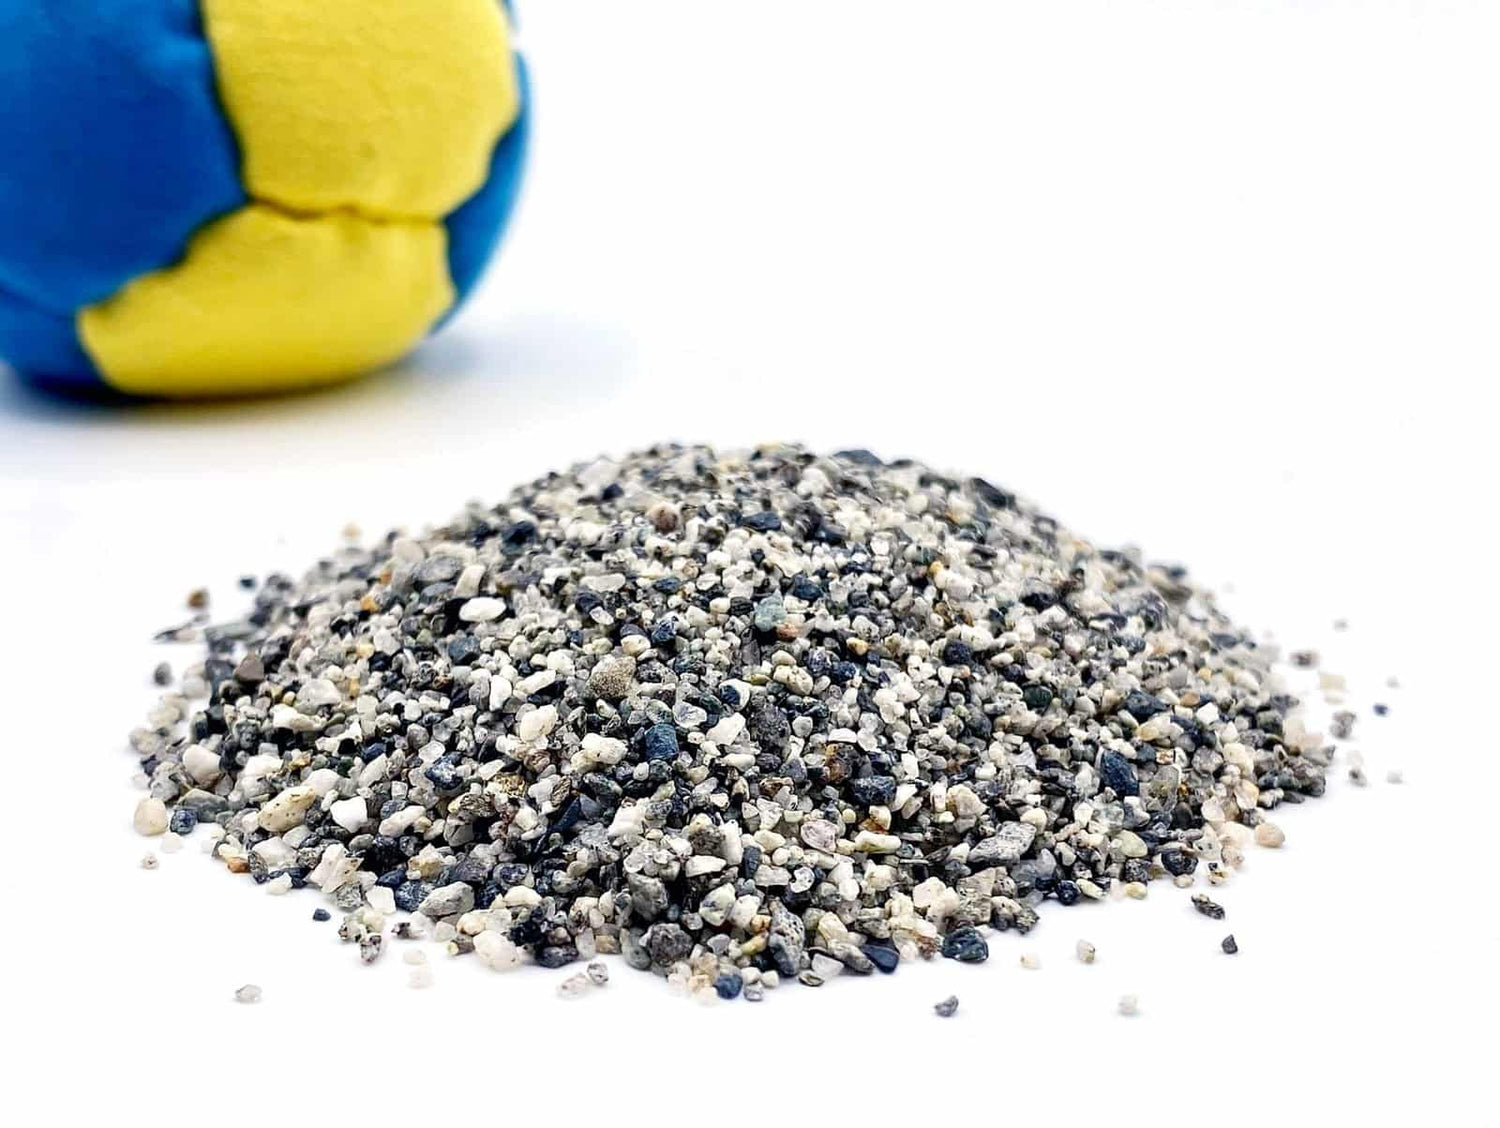 Sand footbag material piled in the center.